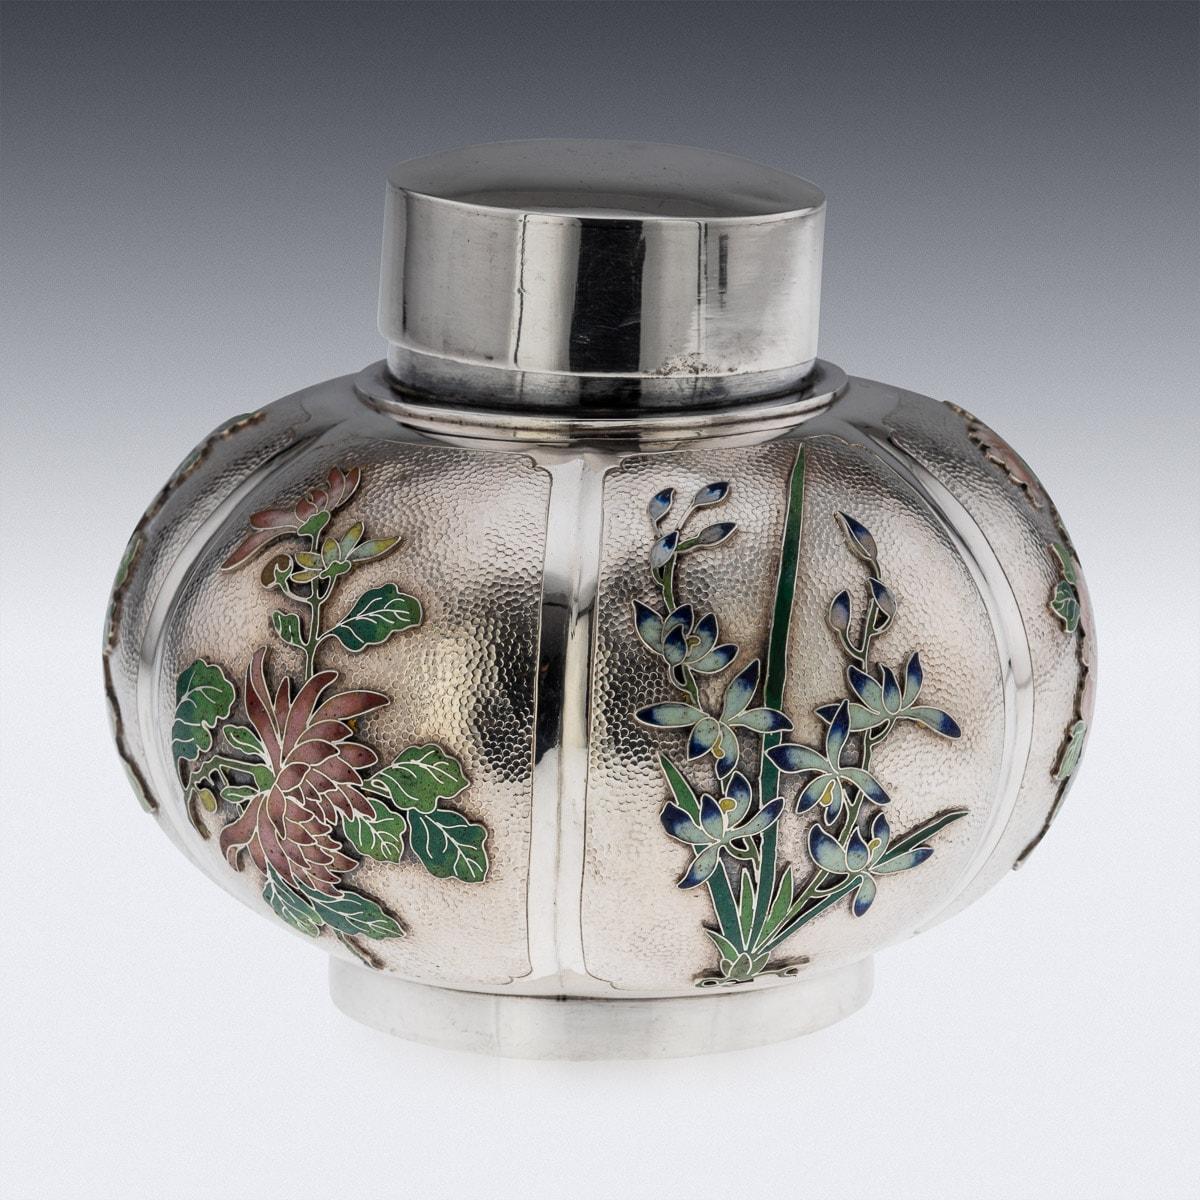 20th Century Chinese Export Solid Silver & Enamel Tea Caddy, Luen Wo, c.1900 2